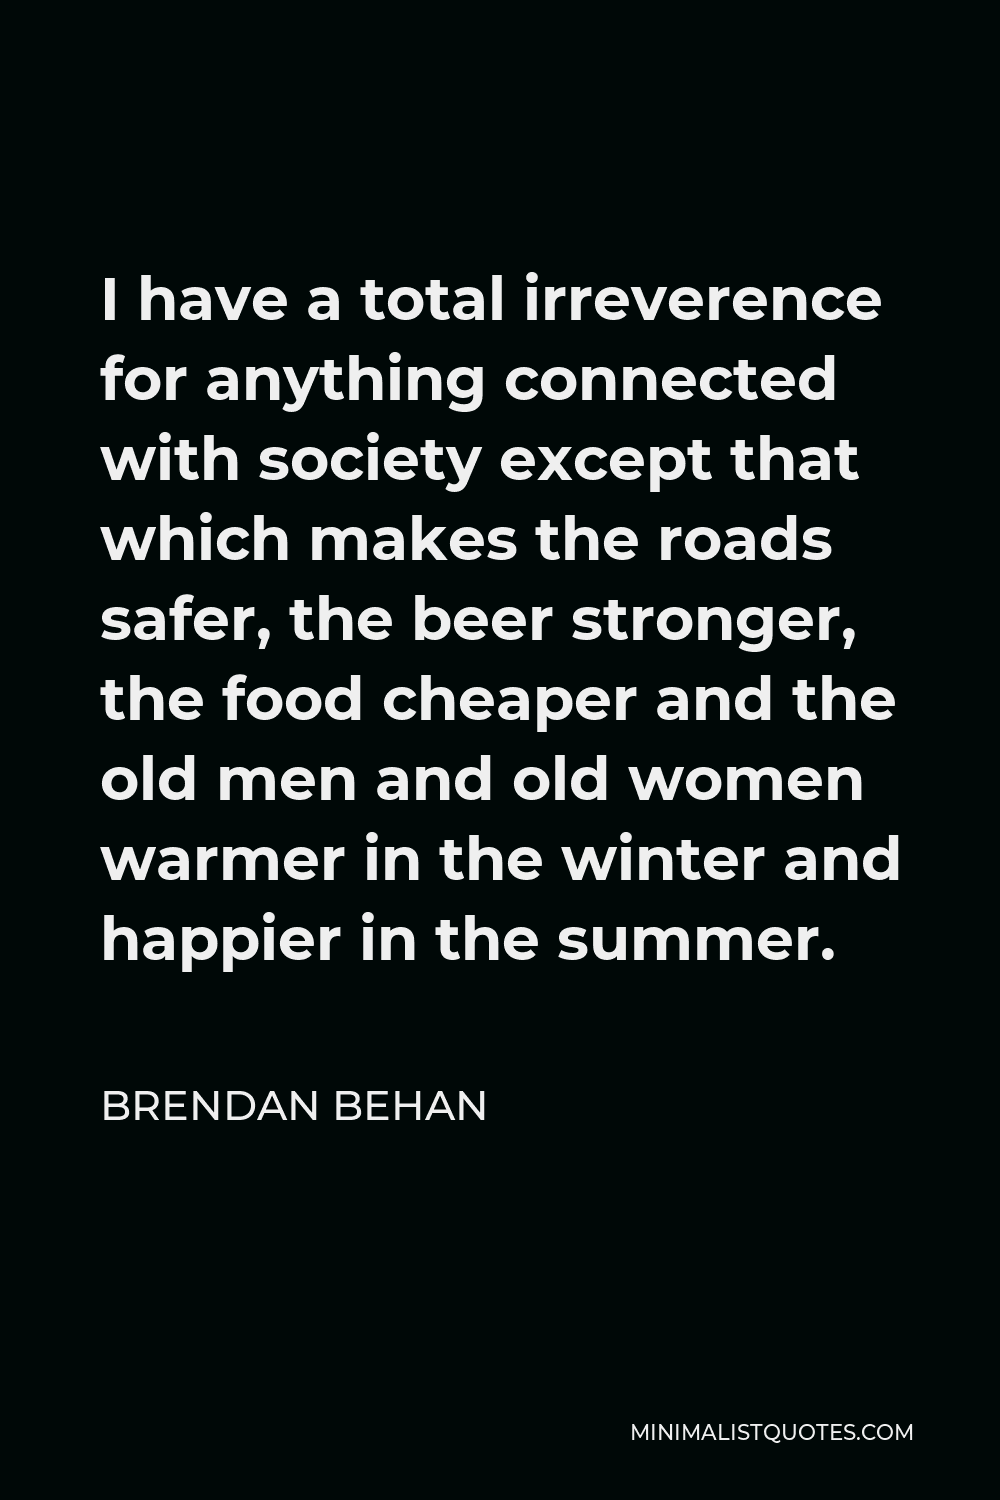 Brendan Behan Quote - I have a total irreverence for anything connected with society except that which makes the roads safer, the beer stronger, the food cheaper and the old men and old women warmer in the winter and happier in the summer.